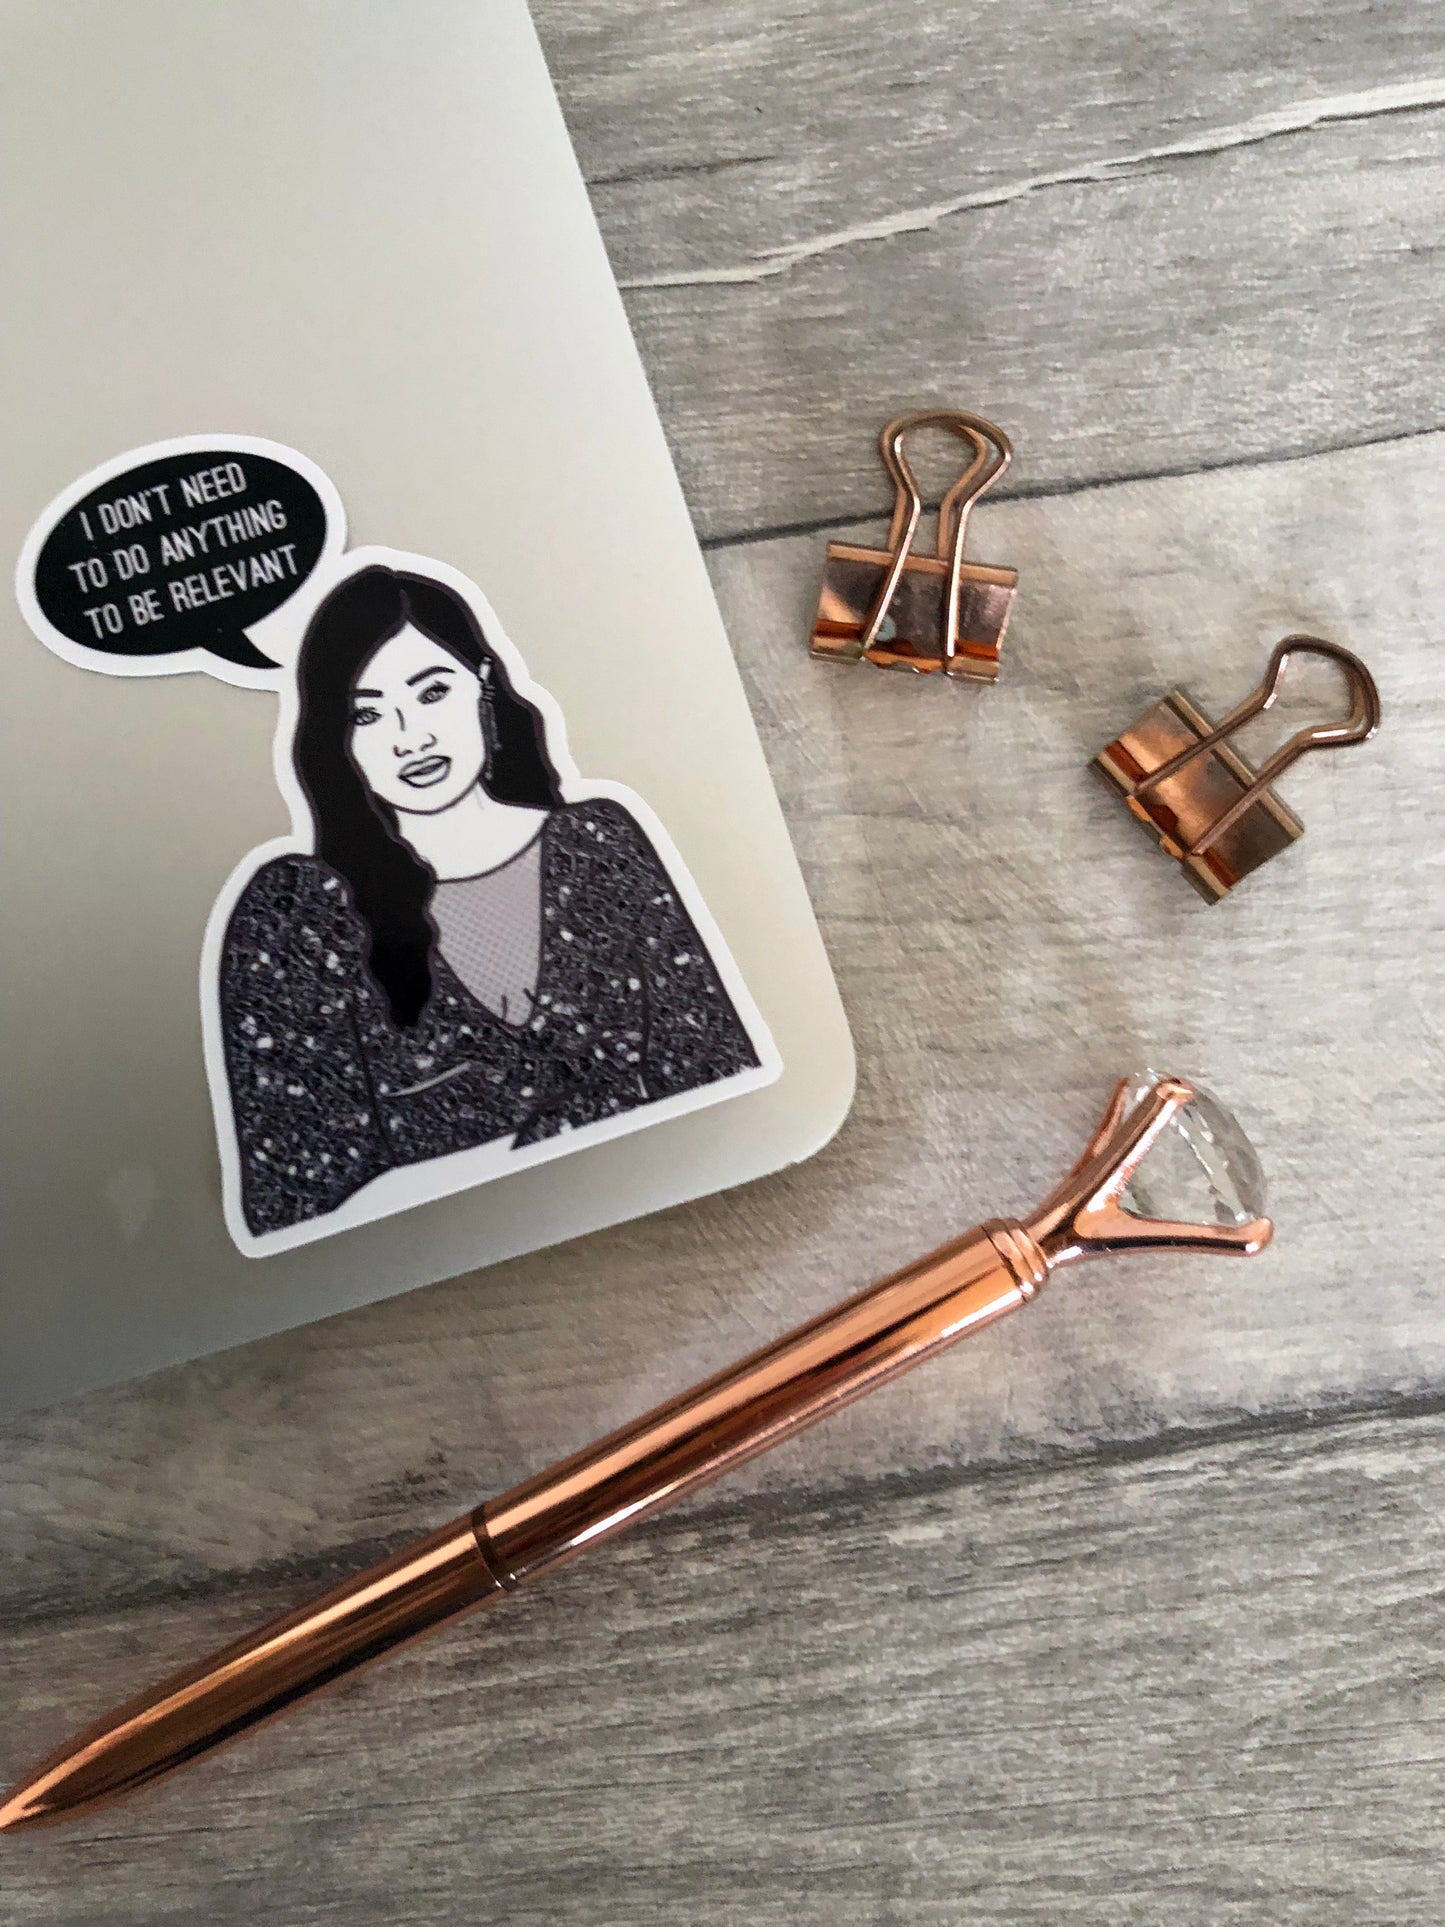 Real Housewives of Beverly Hills inspired Sticker Set